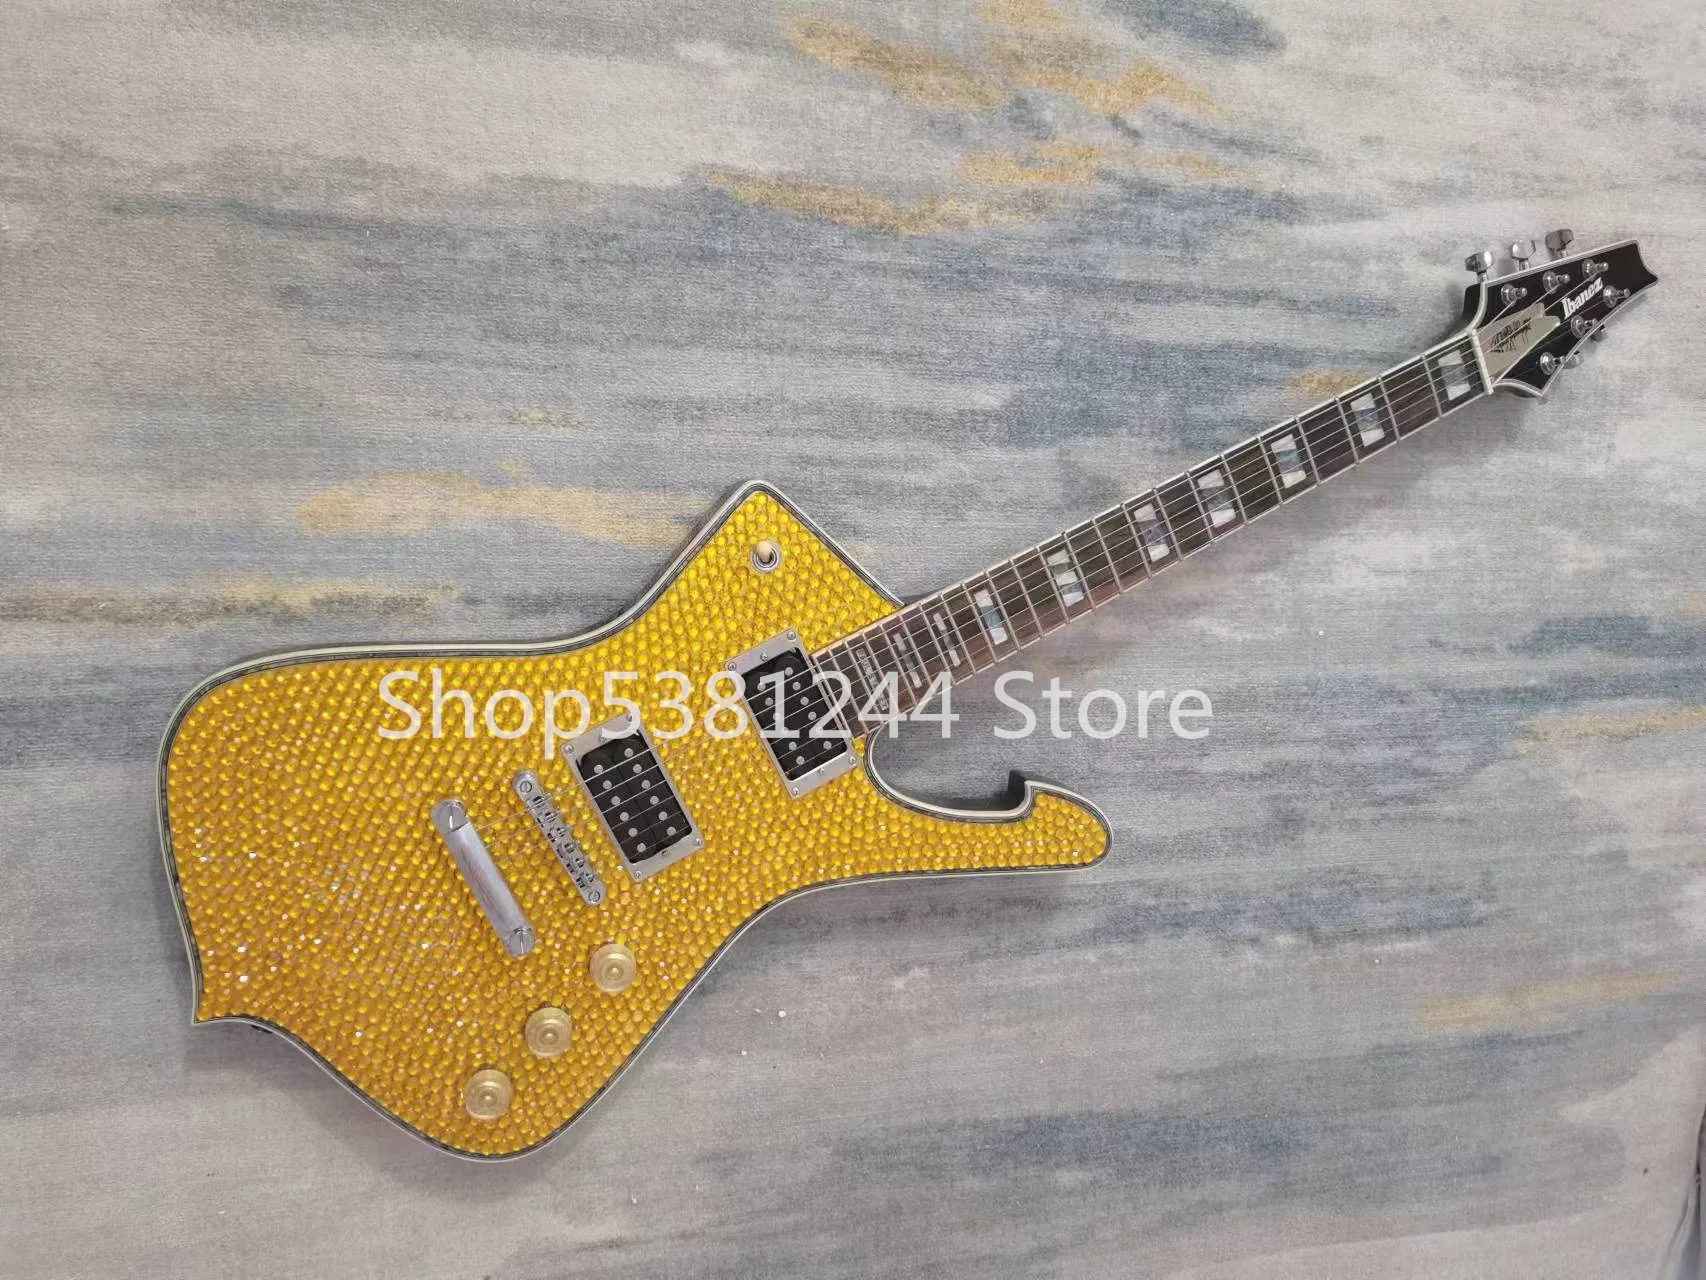 

Six string electric guitar, Diamond inlay on the top layer of the body, rosewood fingerboard, fixed bridge, silver accessories